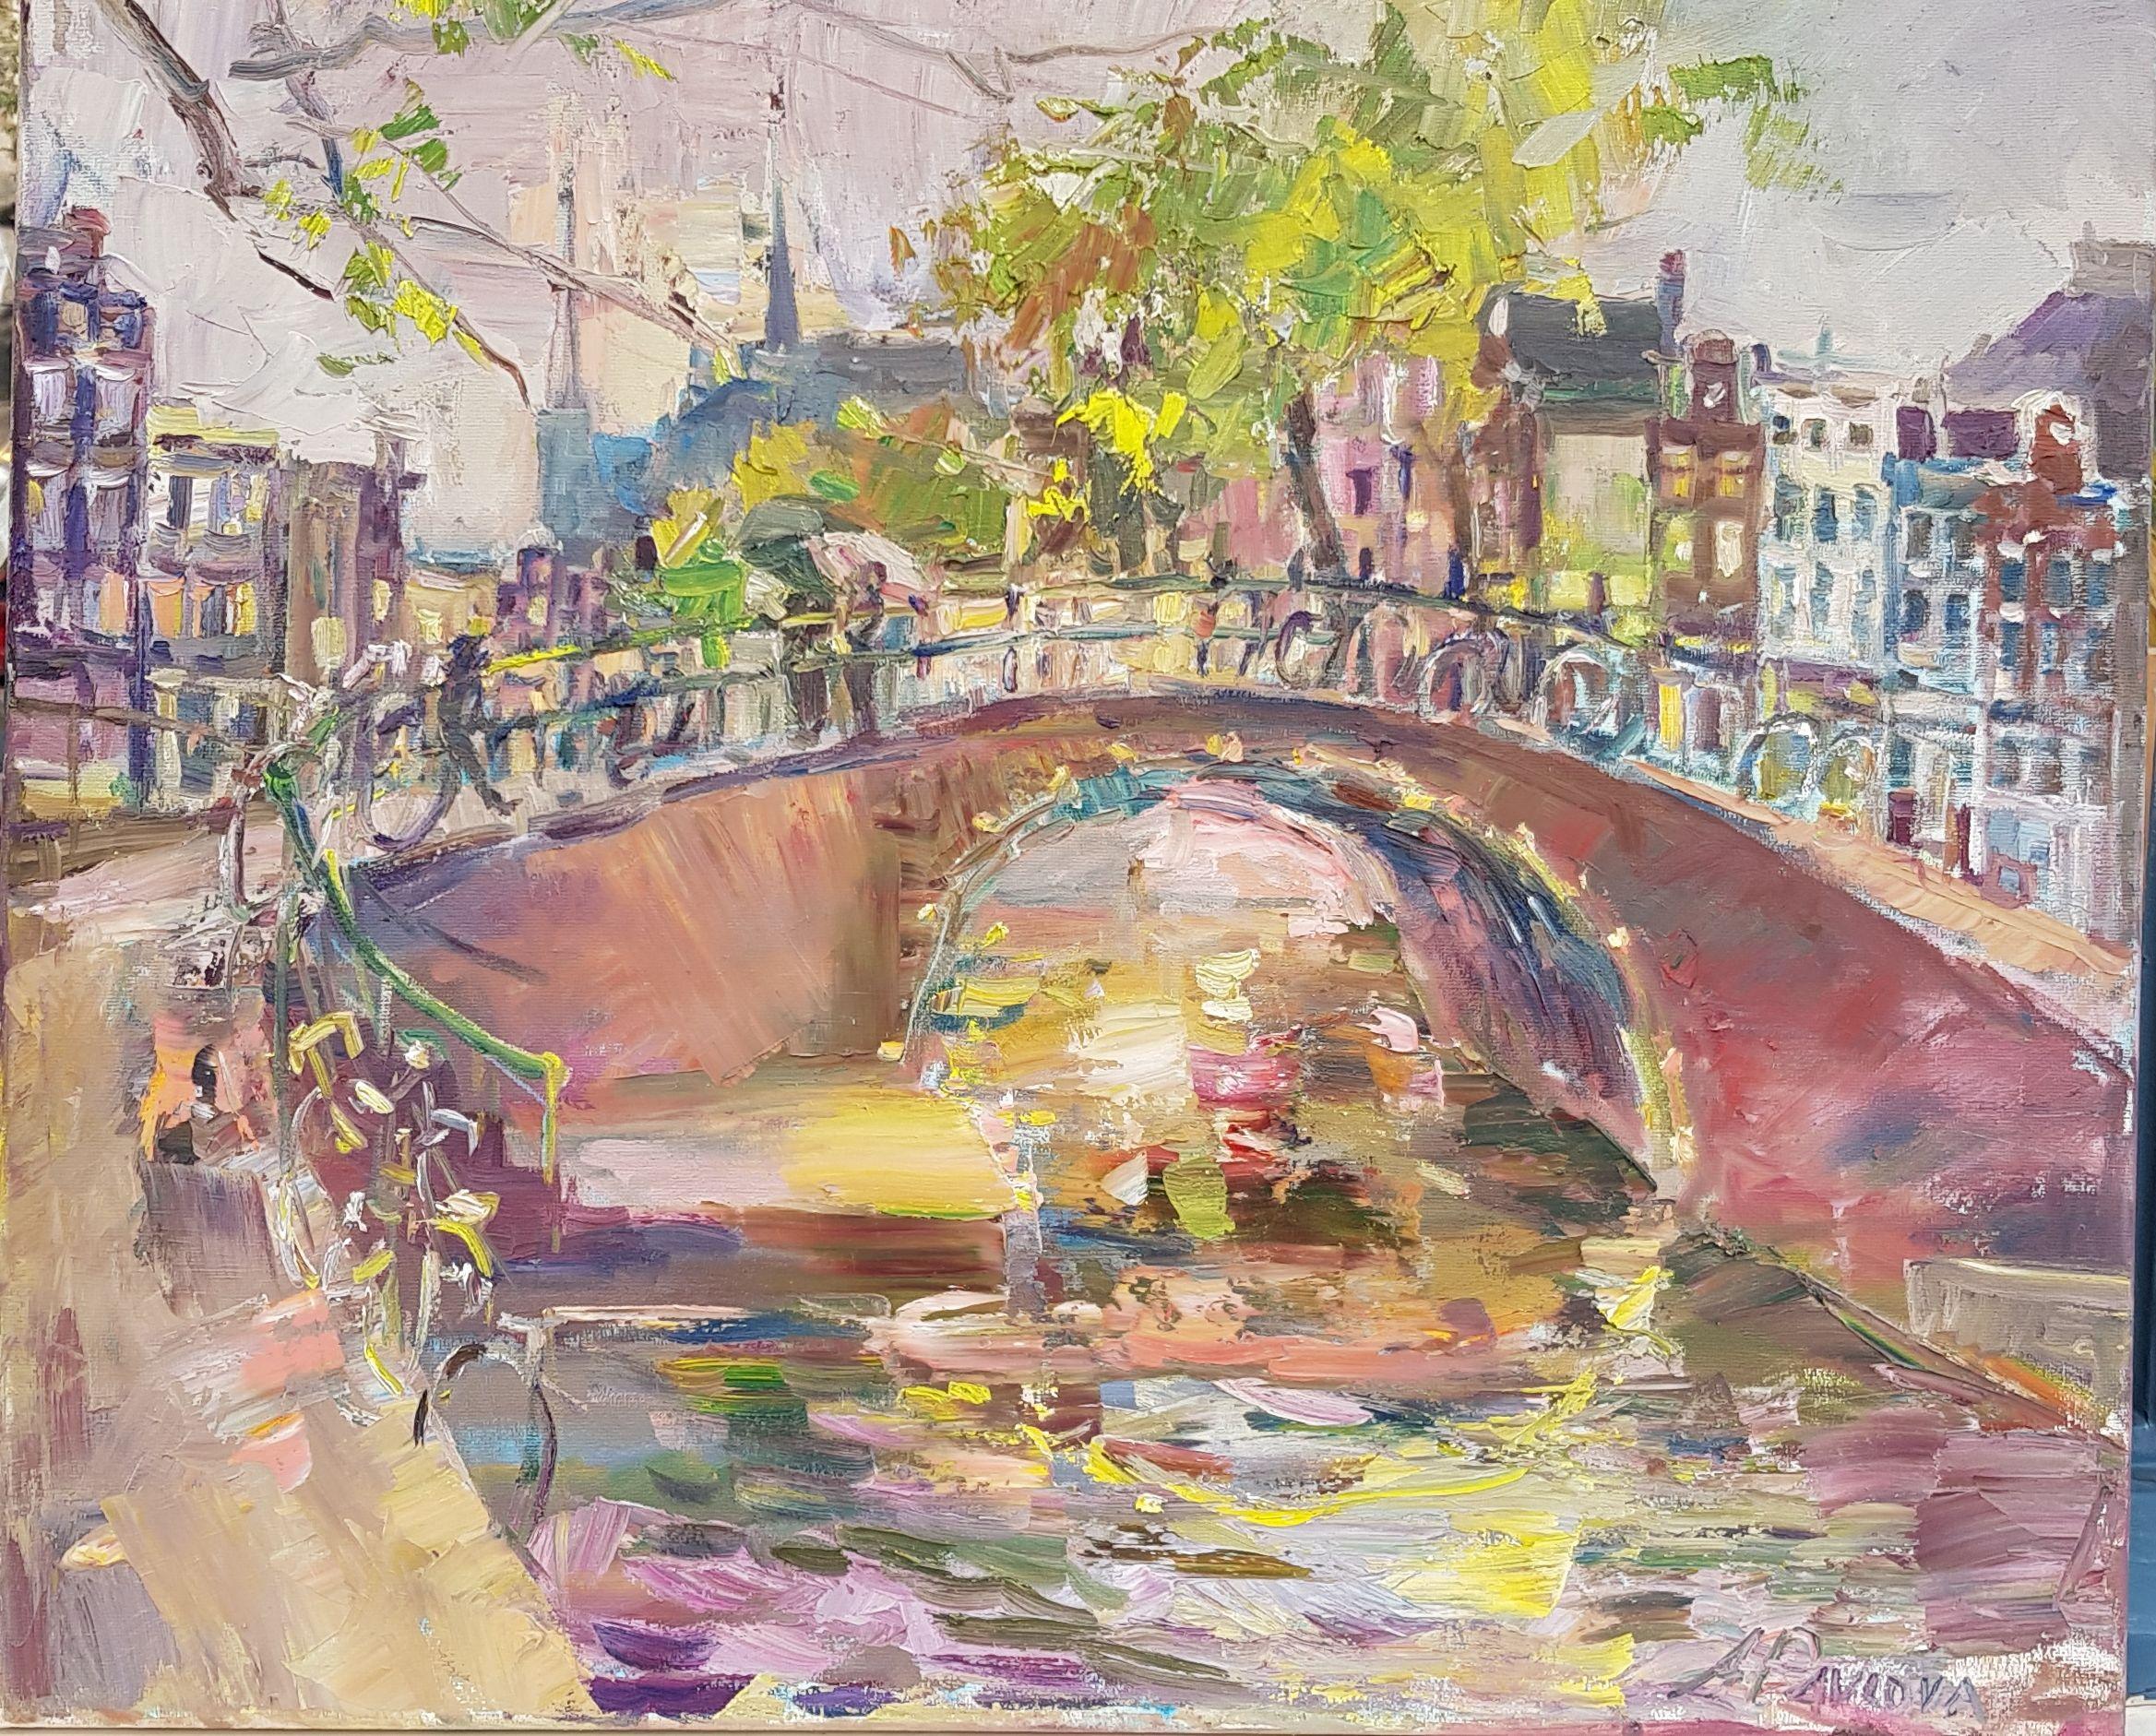 It was amazing warm and quiet day, started with light around bridges, houses, can not miss it to paint. :: Painting :: Impressionist :: This piece comes with an official certificate of authenticity signed by the artist :: Ready to Hang: Yes ::